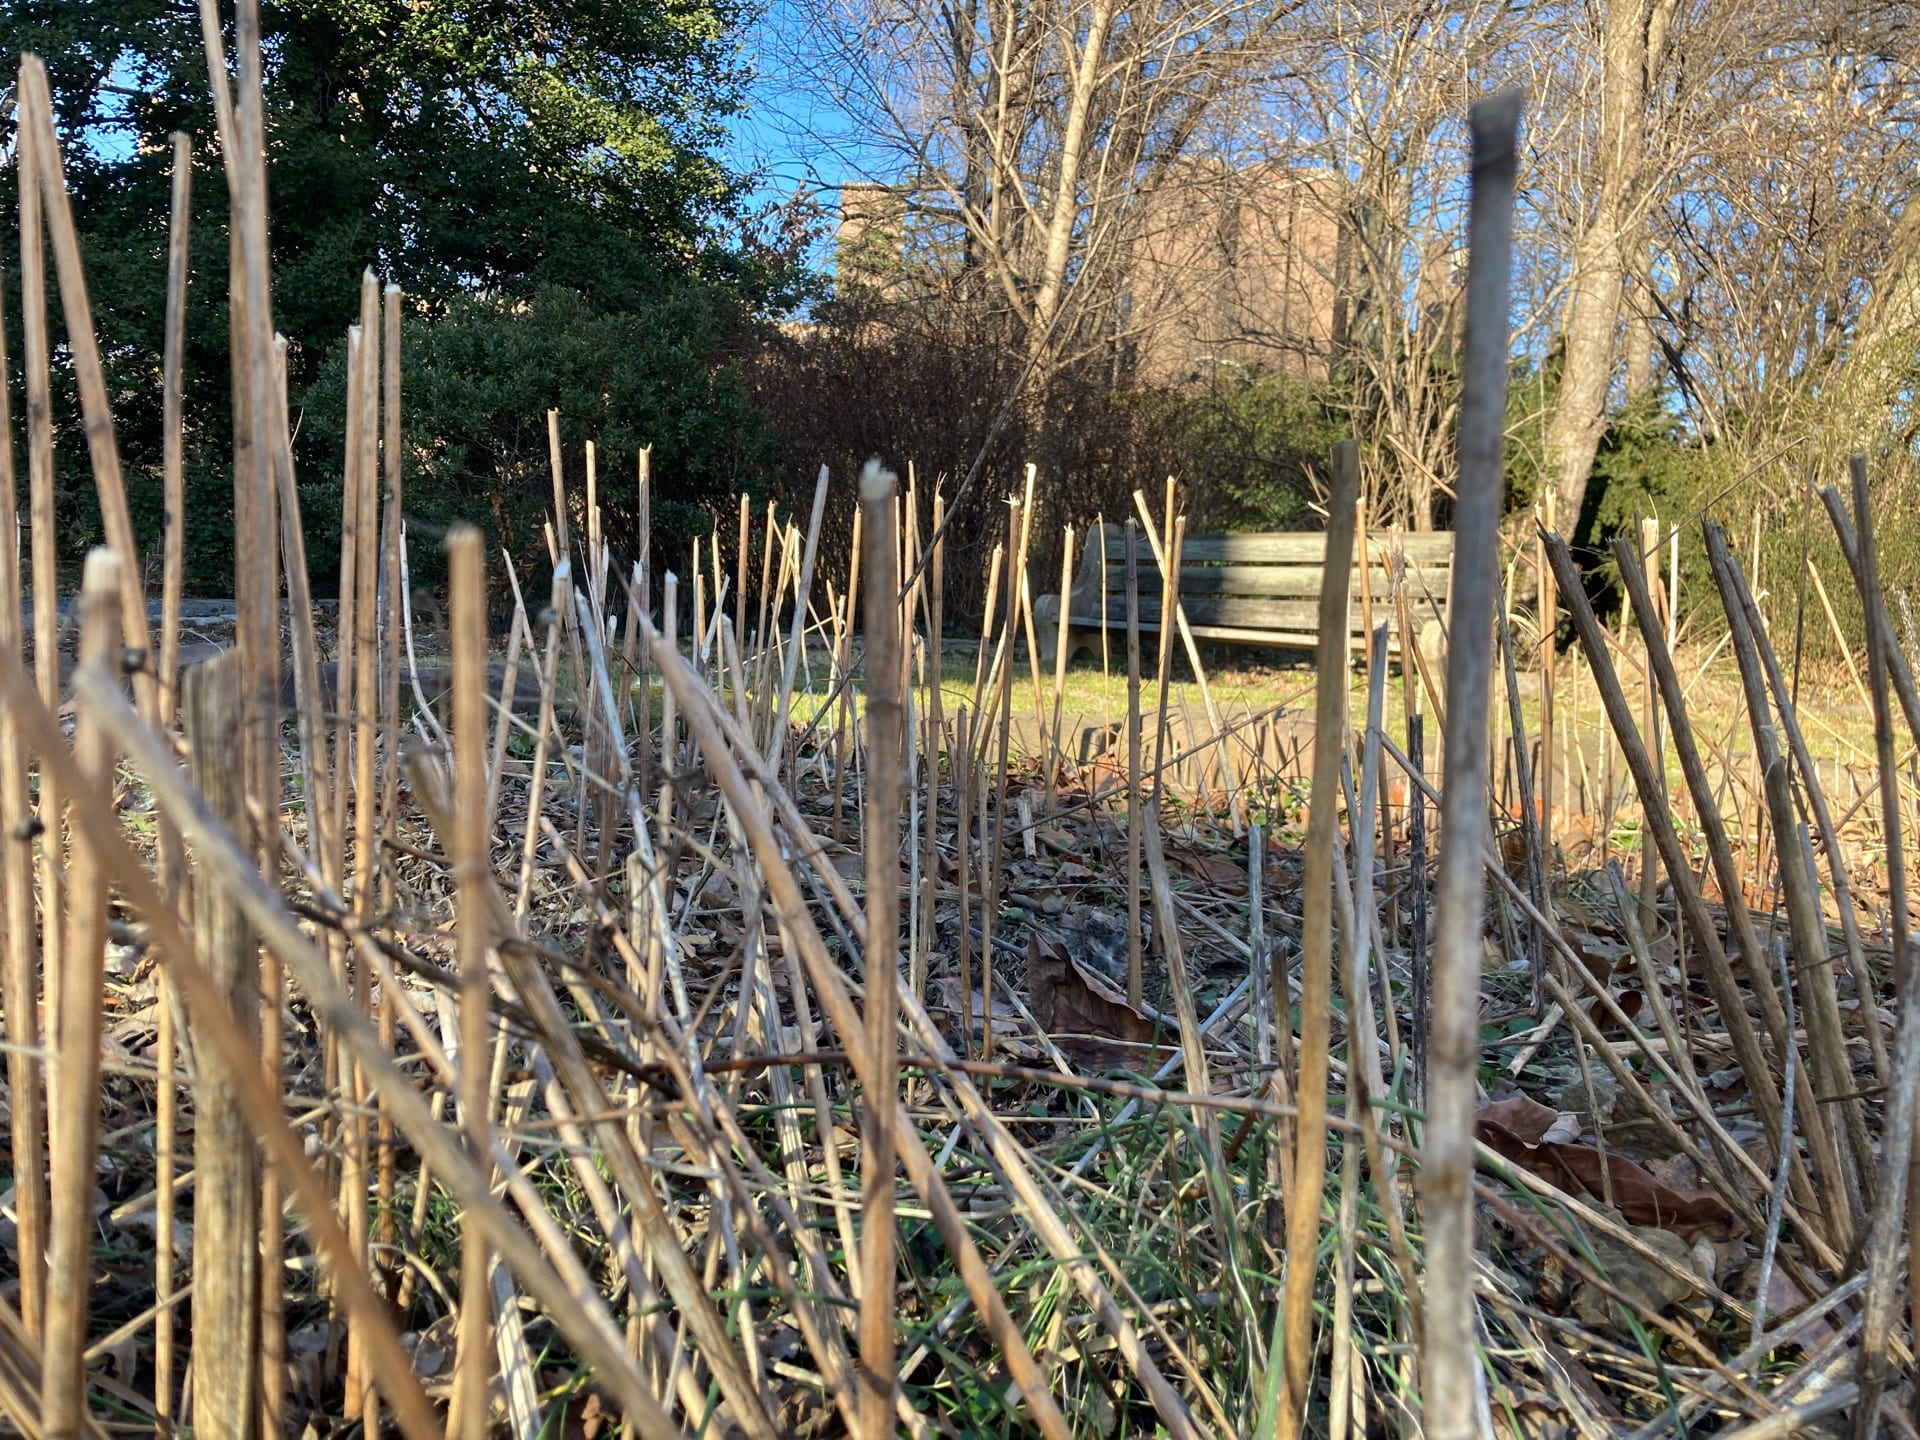 As herbaceous plants were cut back throughout the winter, 18 inch stems were left standing to preserve habitat for overwintering insects. Once temperatures are consistently above 50 degrees these stems will be cut back to the ground.